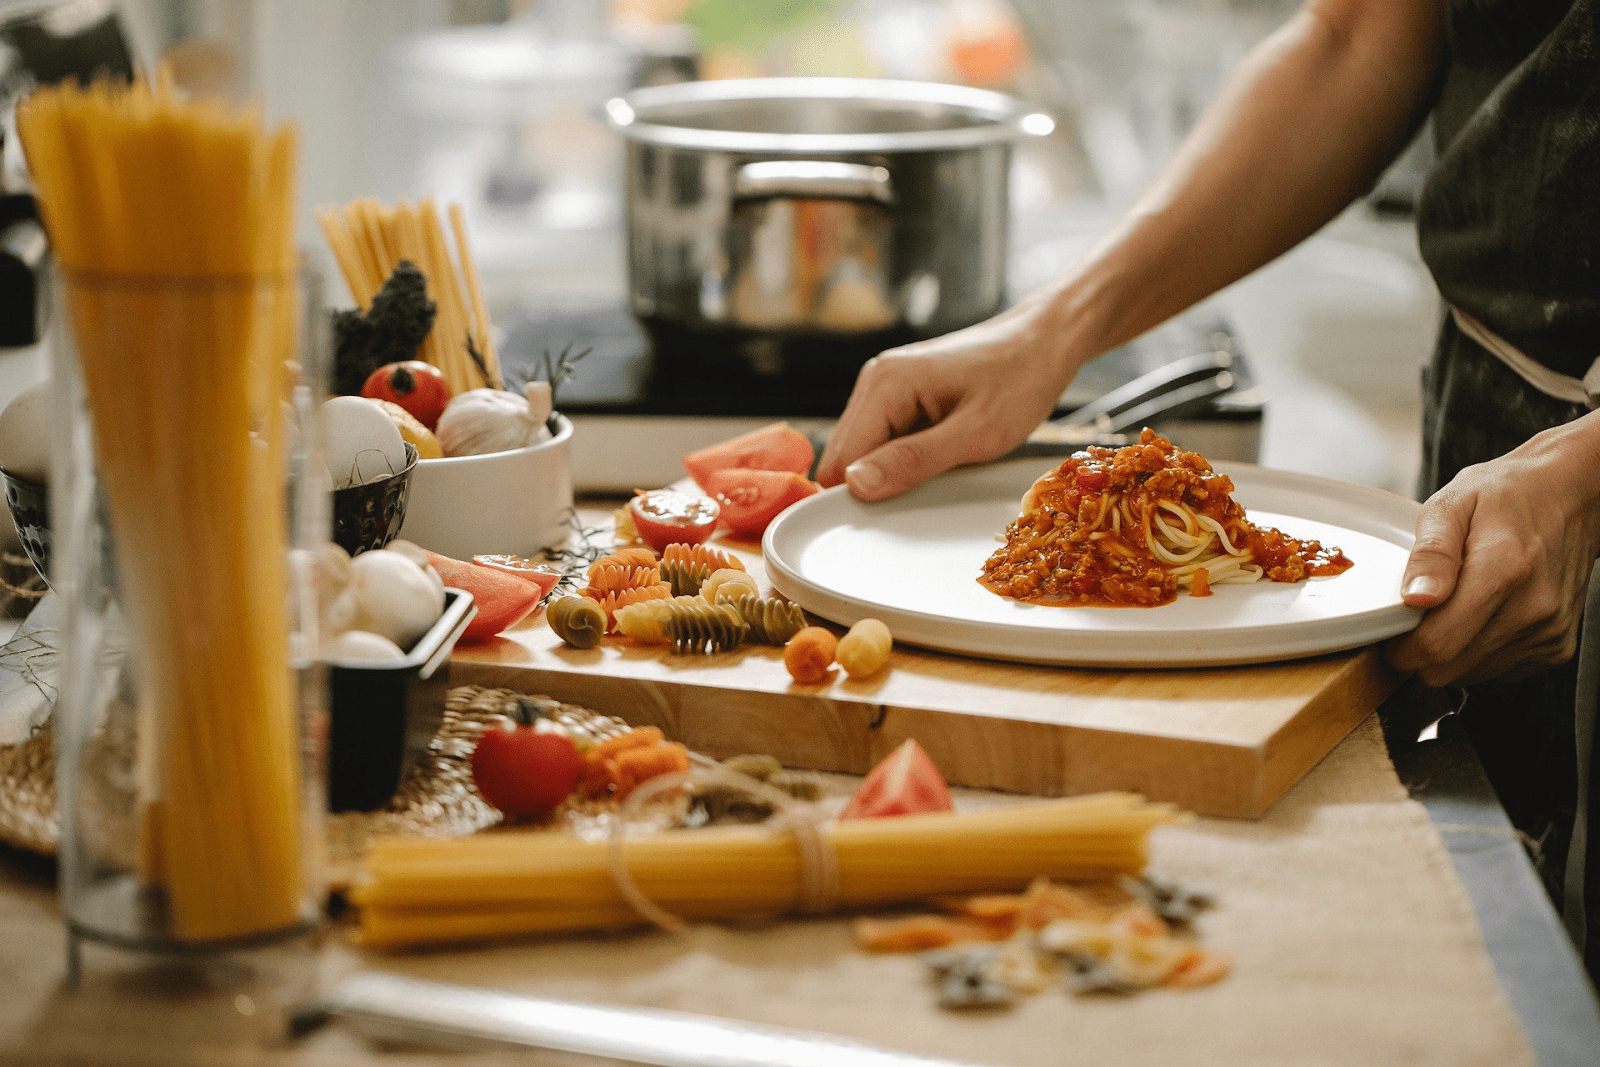 Cooking or preparing a meal is an opportunity to form a loving connection with your food. Source: Journey Foods